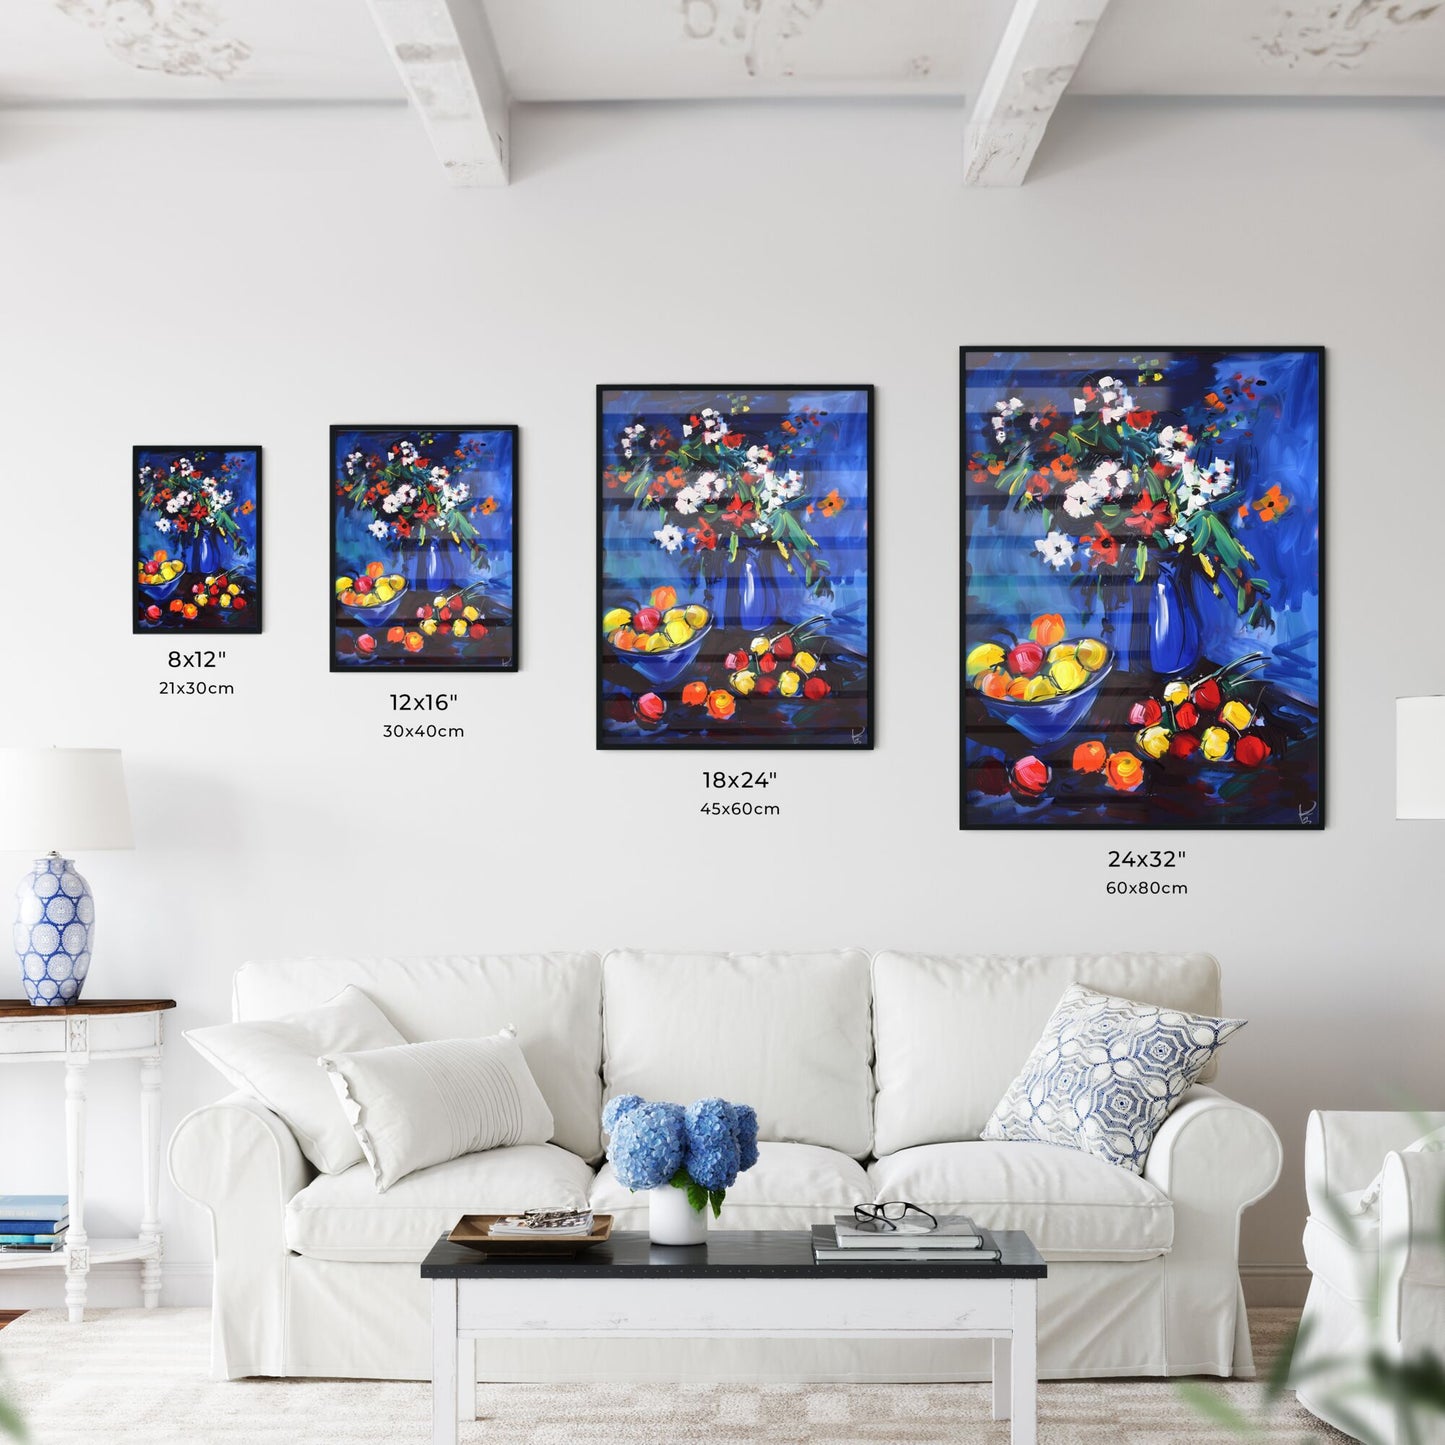 Colorful Abstract Acrylic Painting Flowers Blue Vase Fruit Bowl Still Life Art Print Default Title